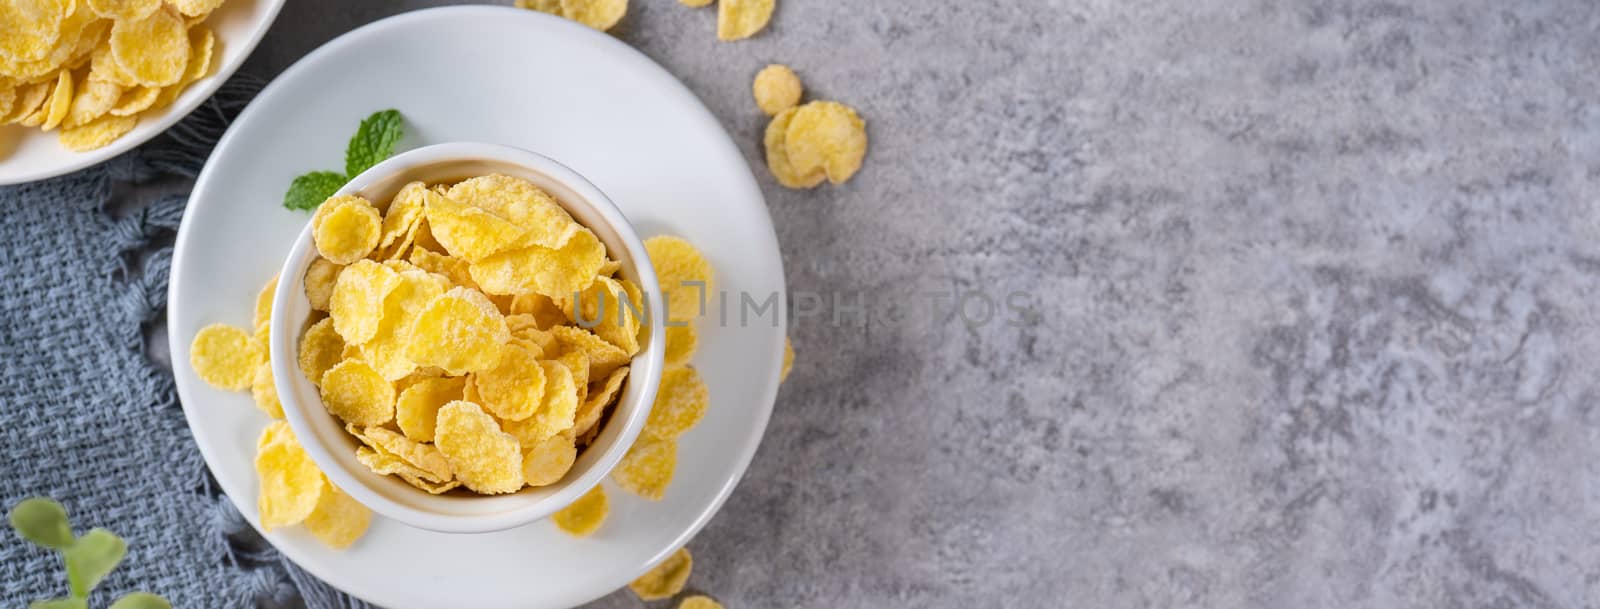 Corn flakes bowl sweets on gray cement background, top view flat lay layout design, fresh and healthy breakfast concept.